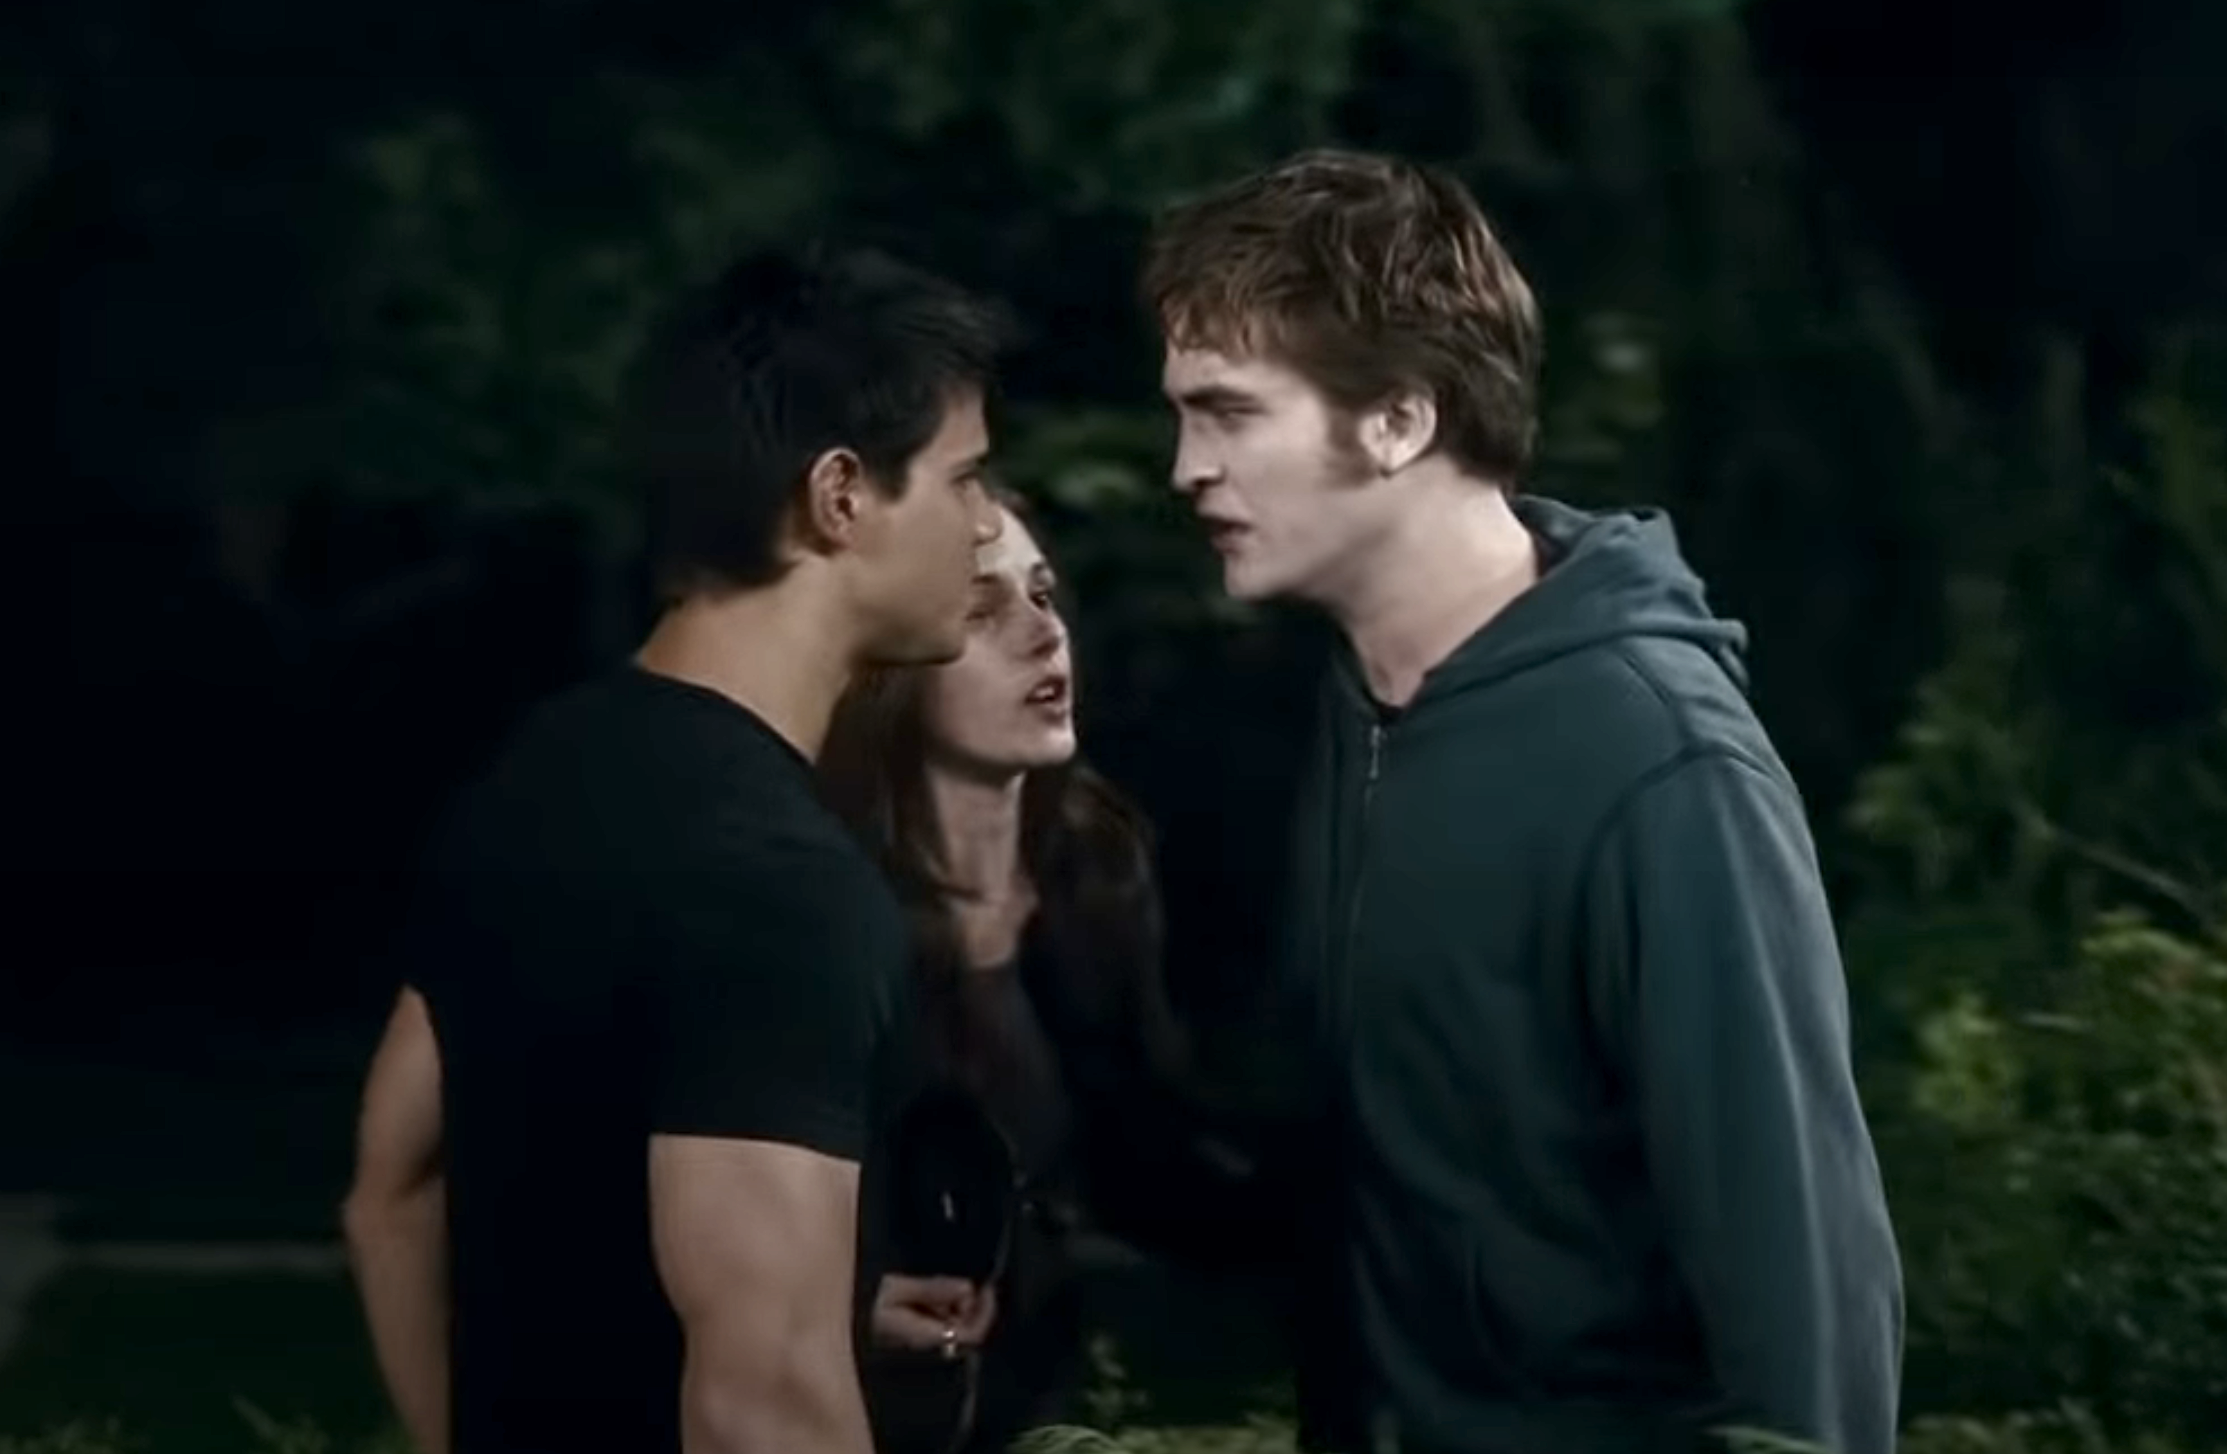 Edward and Jacob in a fight with Bella in the center